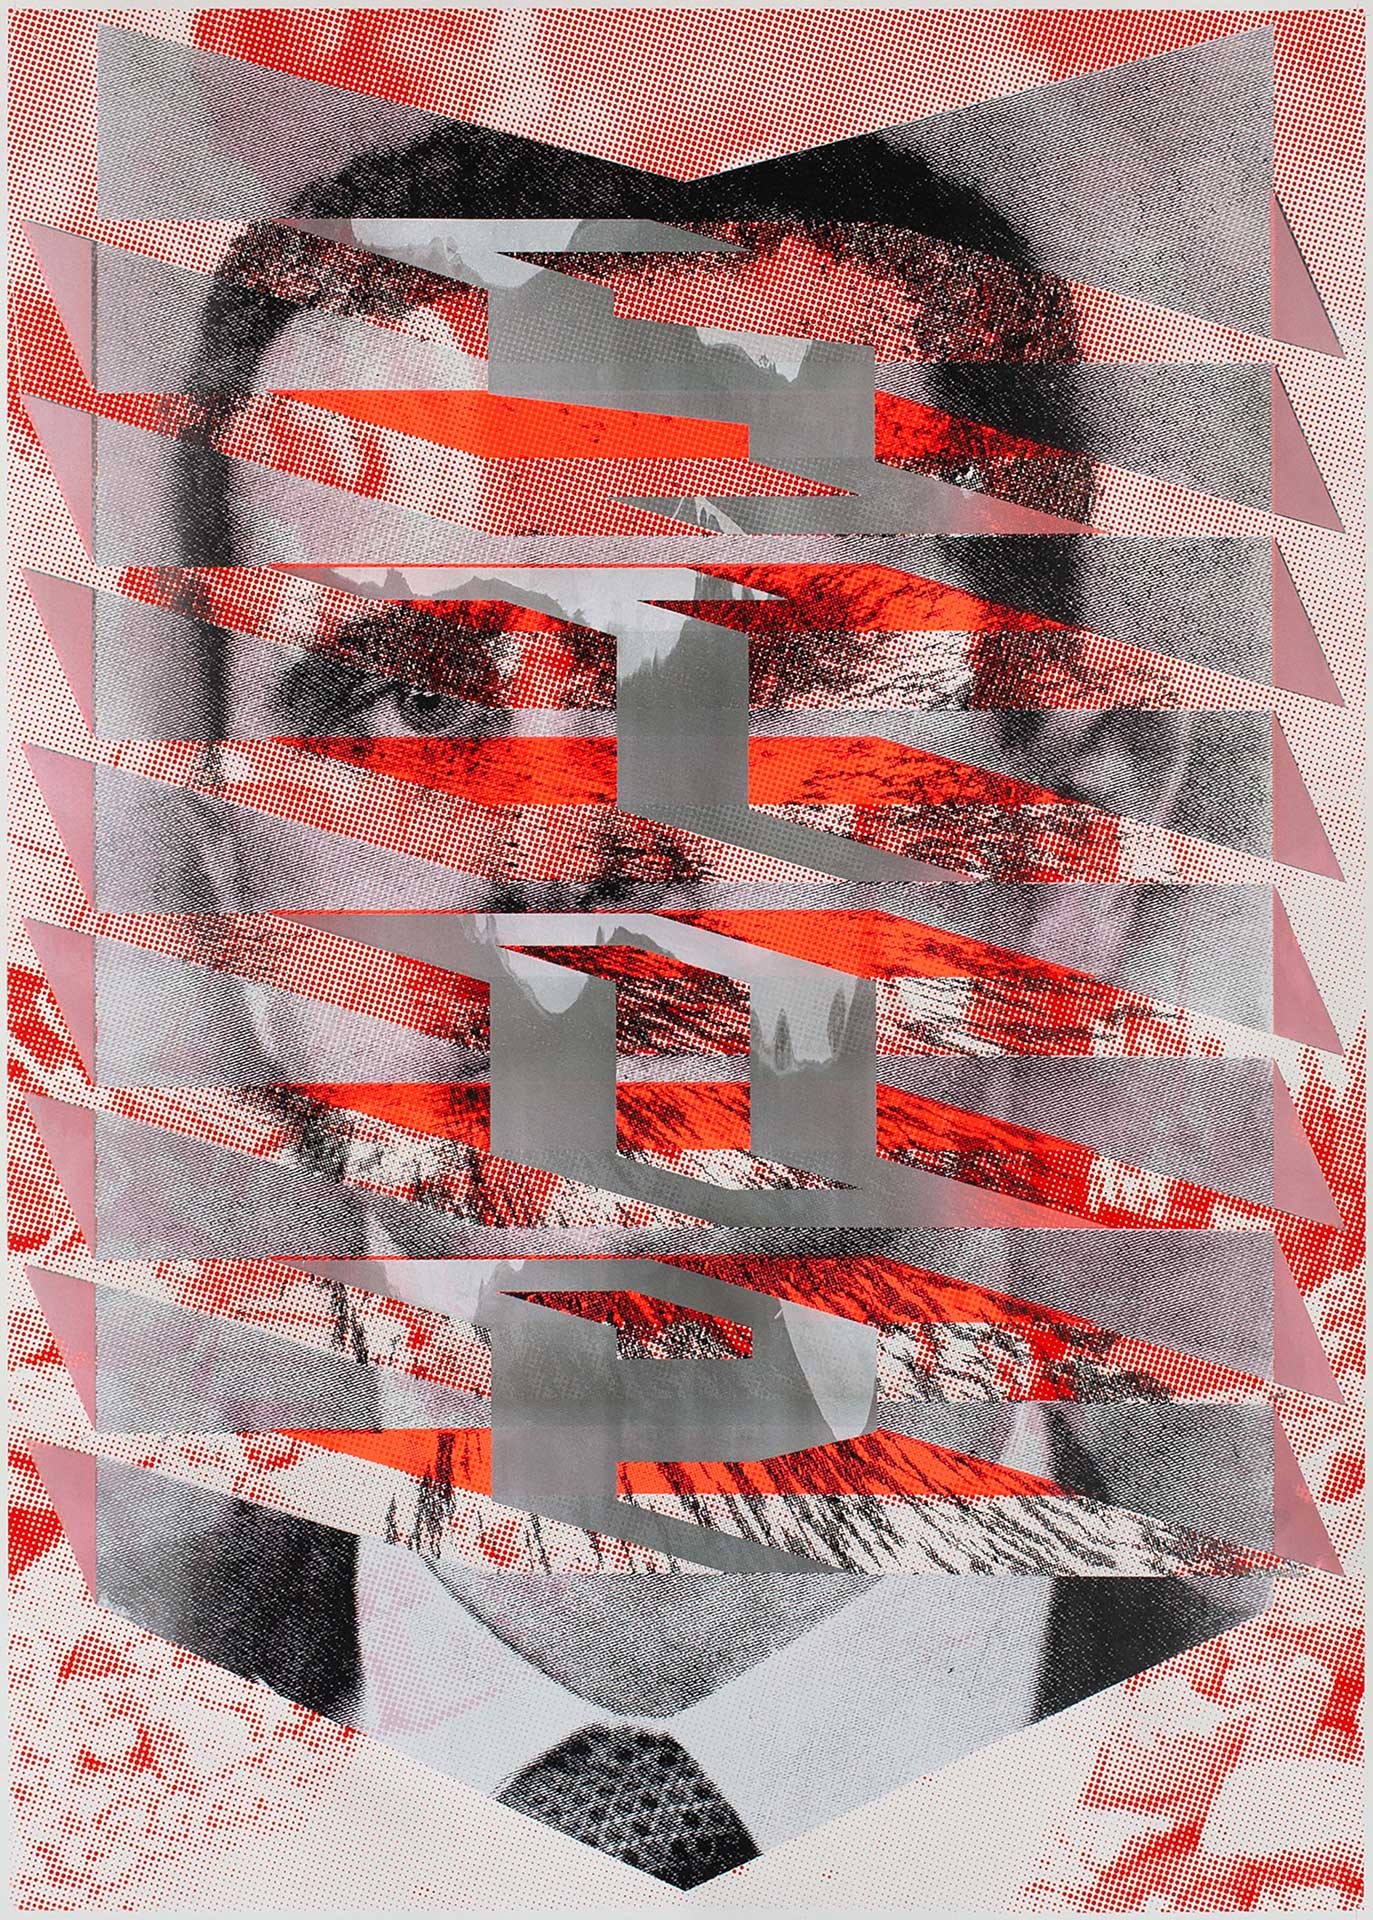 <BODY><div>Graphic design: Leander Eisenmann </div><div>Stop Asad (series of 5 posters, commissioned by the designer)</div><div>Printing: printed by the designer in the printing workshop of the FHNW Academy of Art and Design </div><div>Switzerland </div><div>© Leander Eisenmann/100 Beste Plakate e. V.</div><div> </div></BODY>